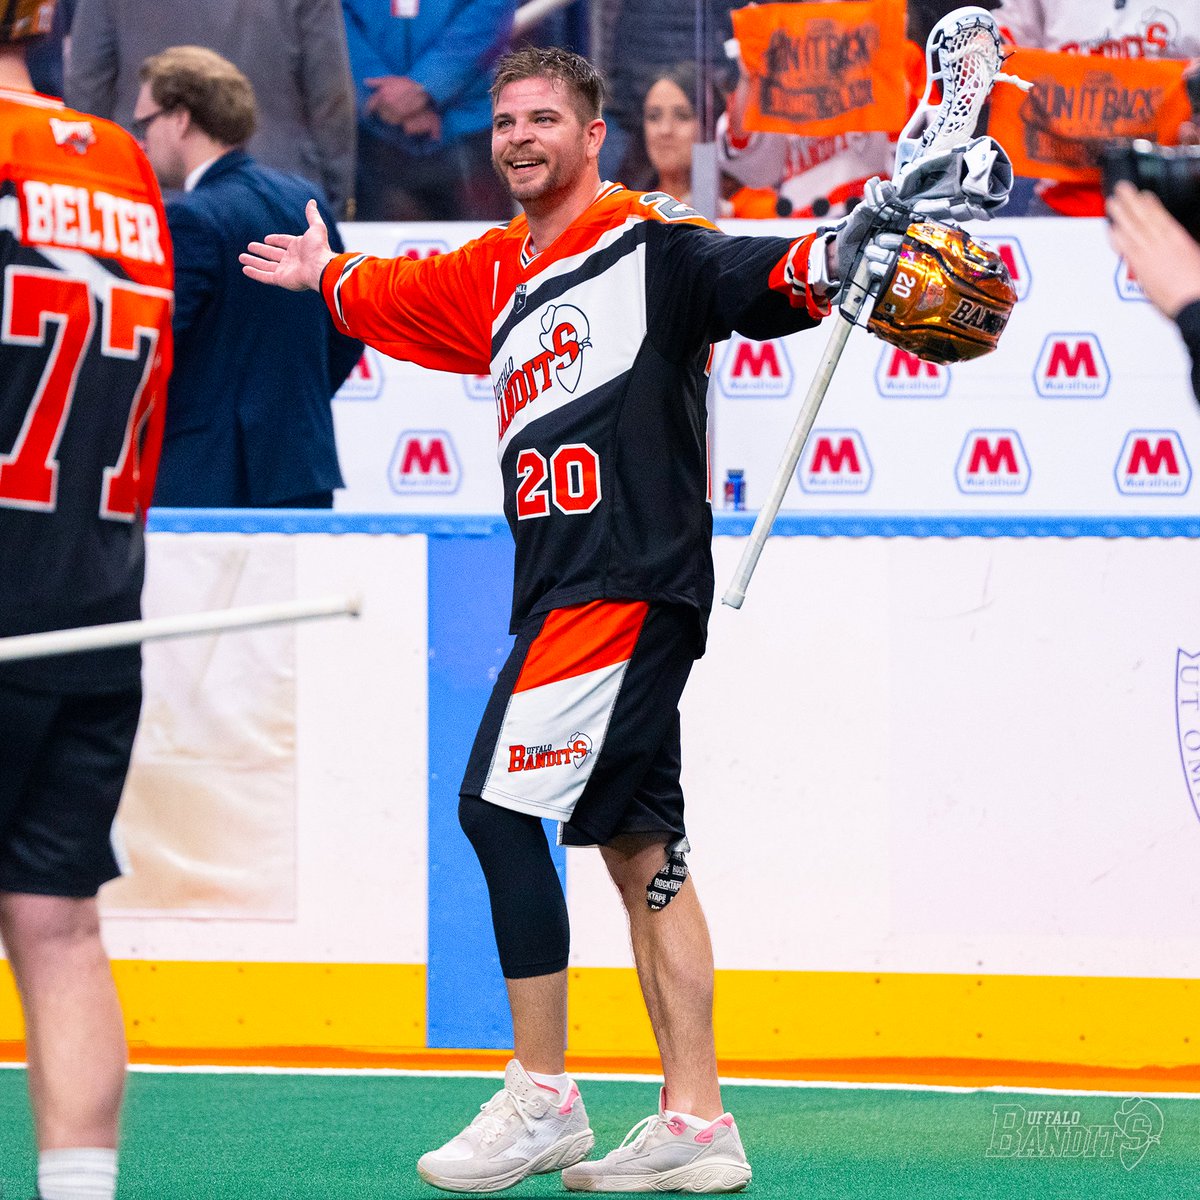 Be sure to tune in to @SabresLive at 12:15, when Nick Weiss joins Duffer and Marty to preview the NLL Finals!